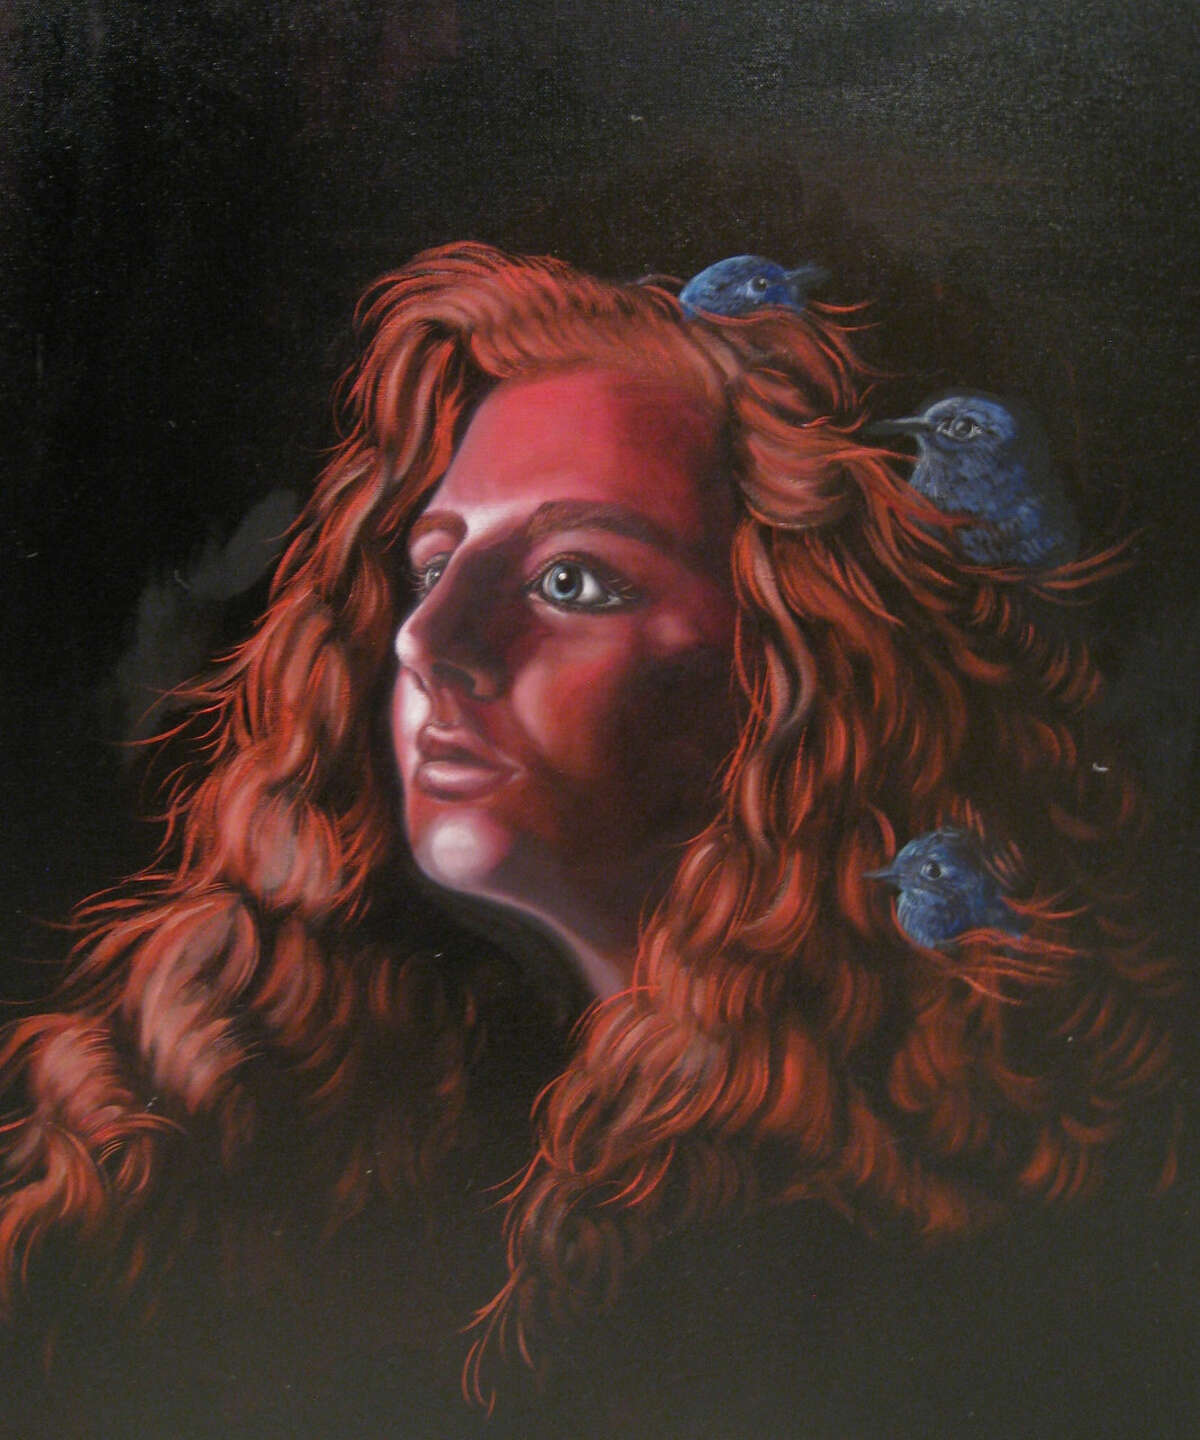 A photo of an oil/acrylic portrait painting by Ava Bramblett titled "Cinderella," which won the top award (First Prize) at the Jan, 14 Conroe Art League Student Scholarship art competition.